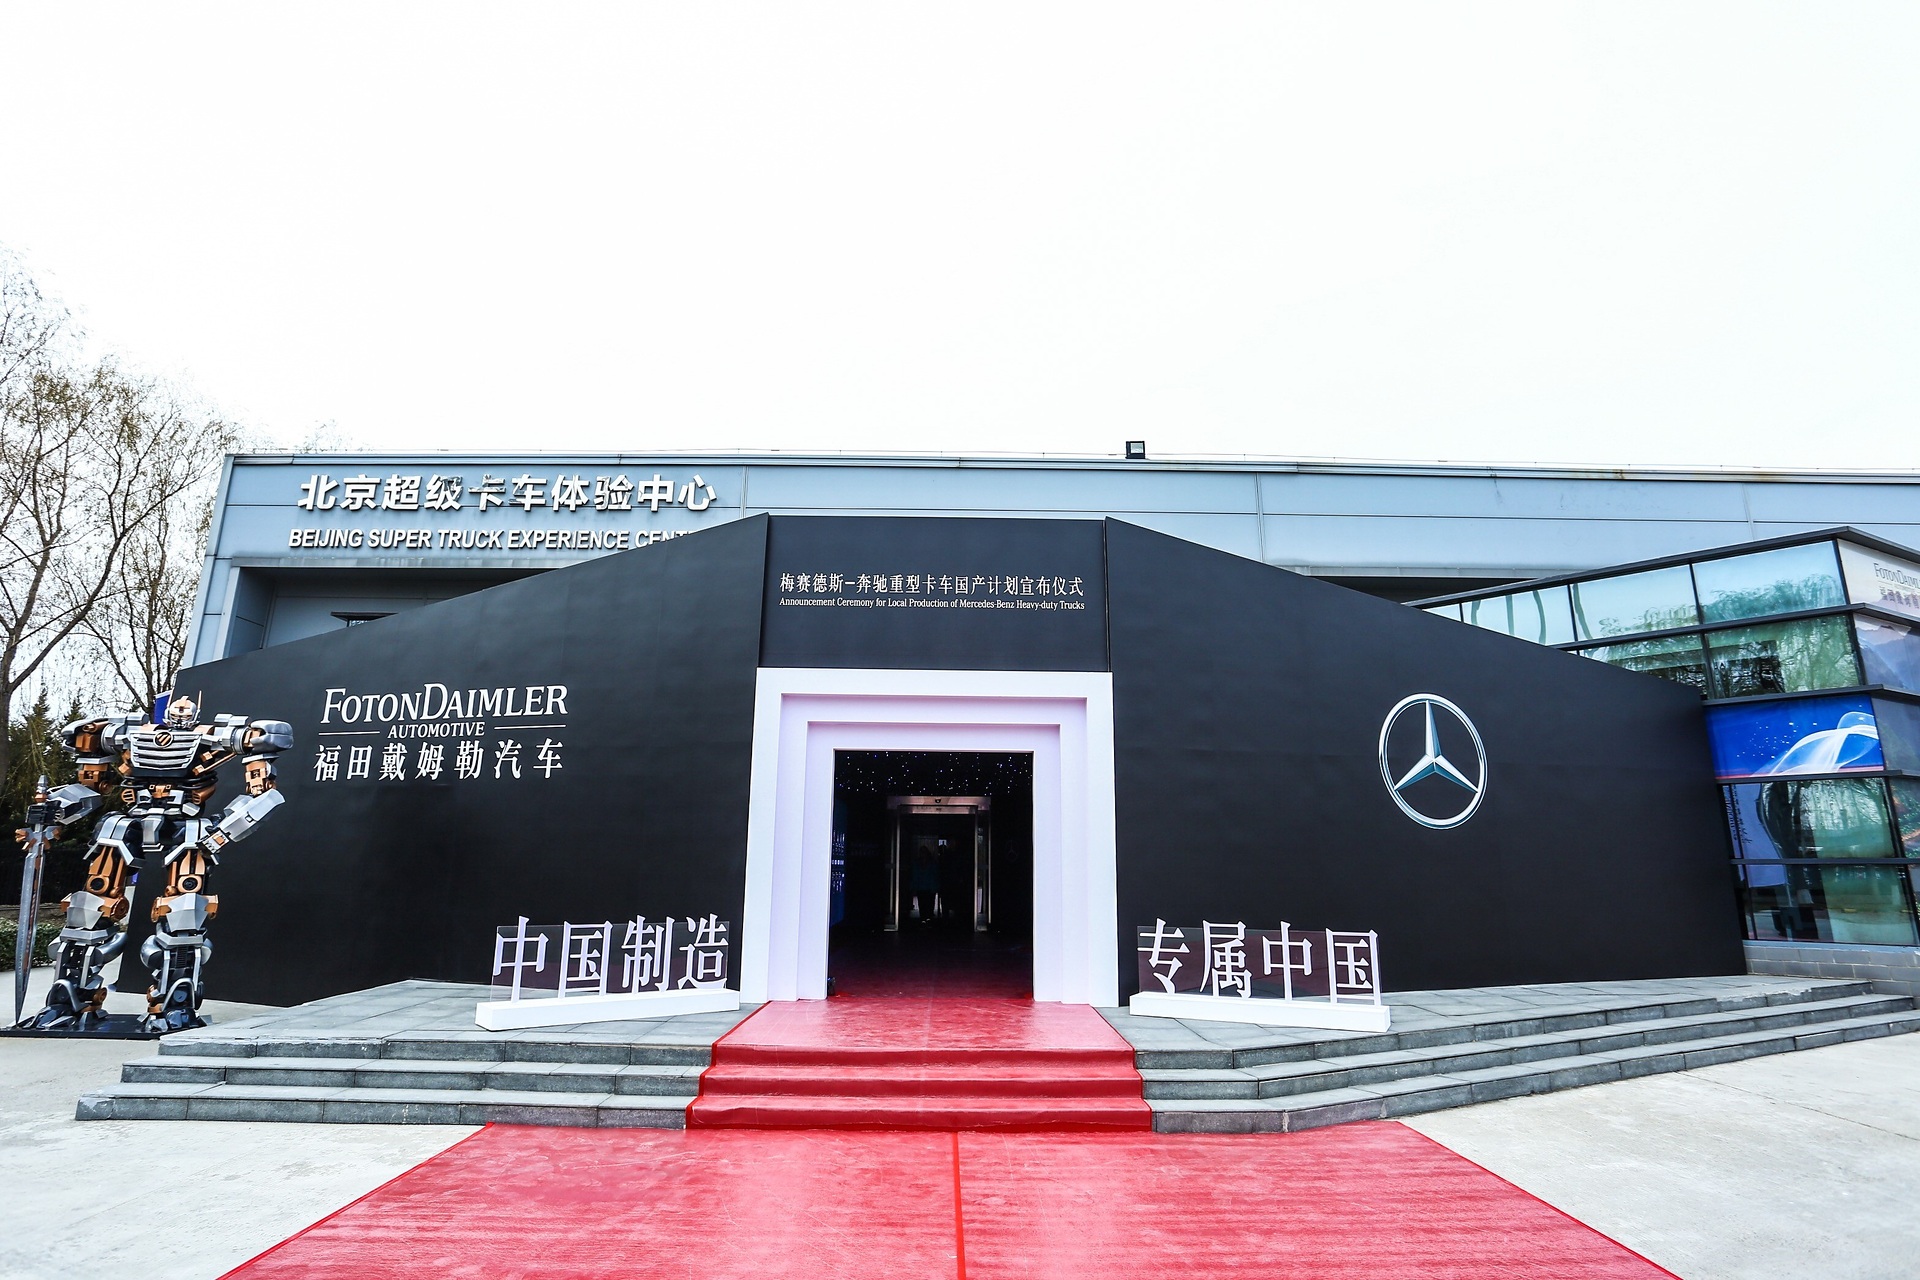 Daimler Truck AG and Foton start joint production of Mercedes-Benz Trucks in China for China